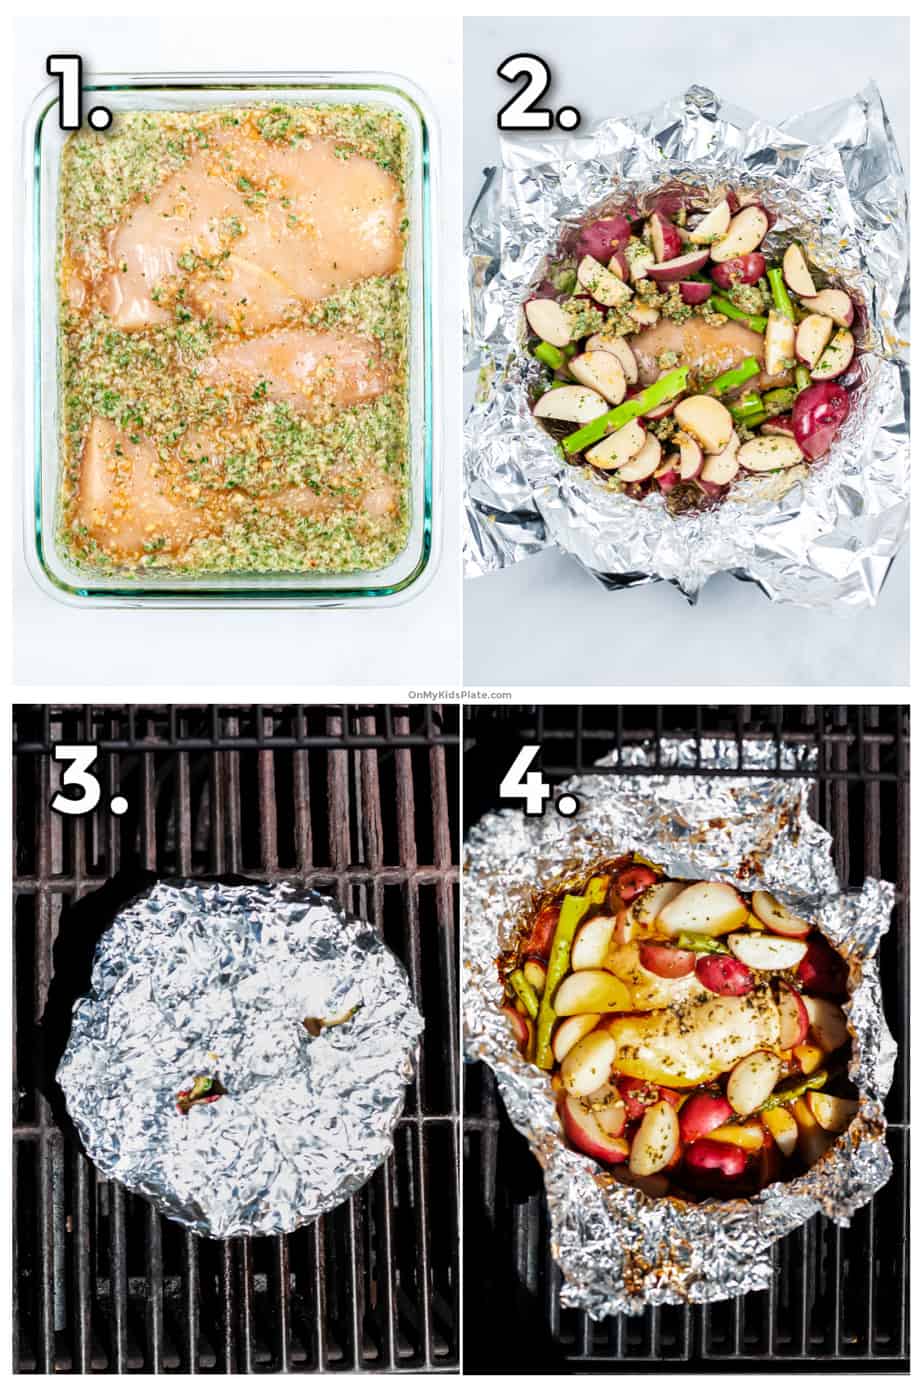 Process photos showing marinating the chicken, layering the chicken packets with potatoes, asparagus and sauce, folding up grilling, and the finished packet.